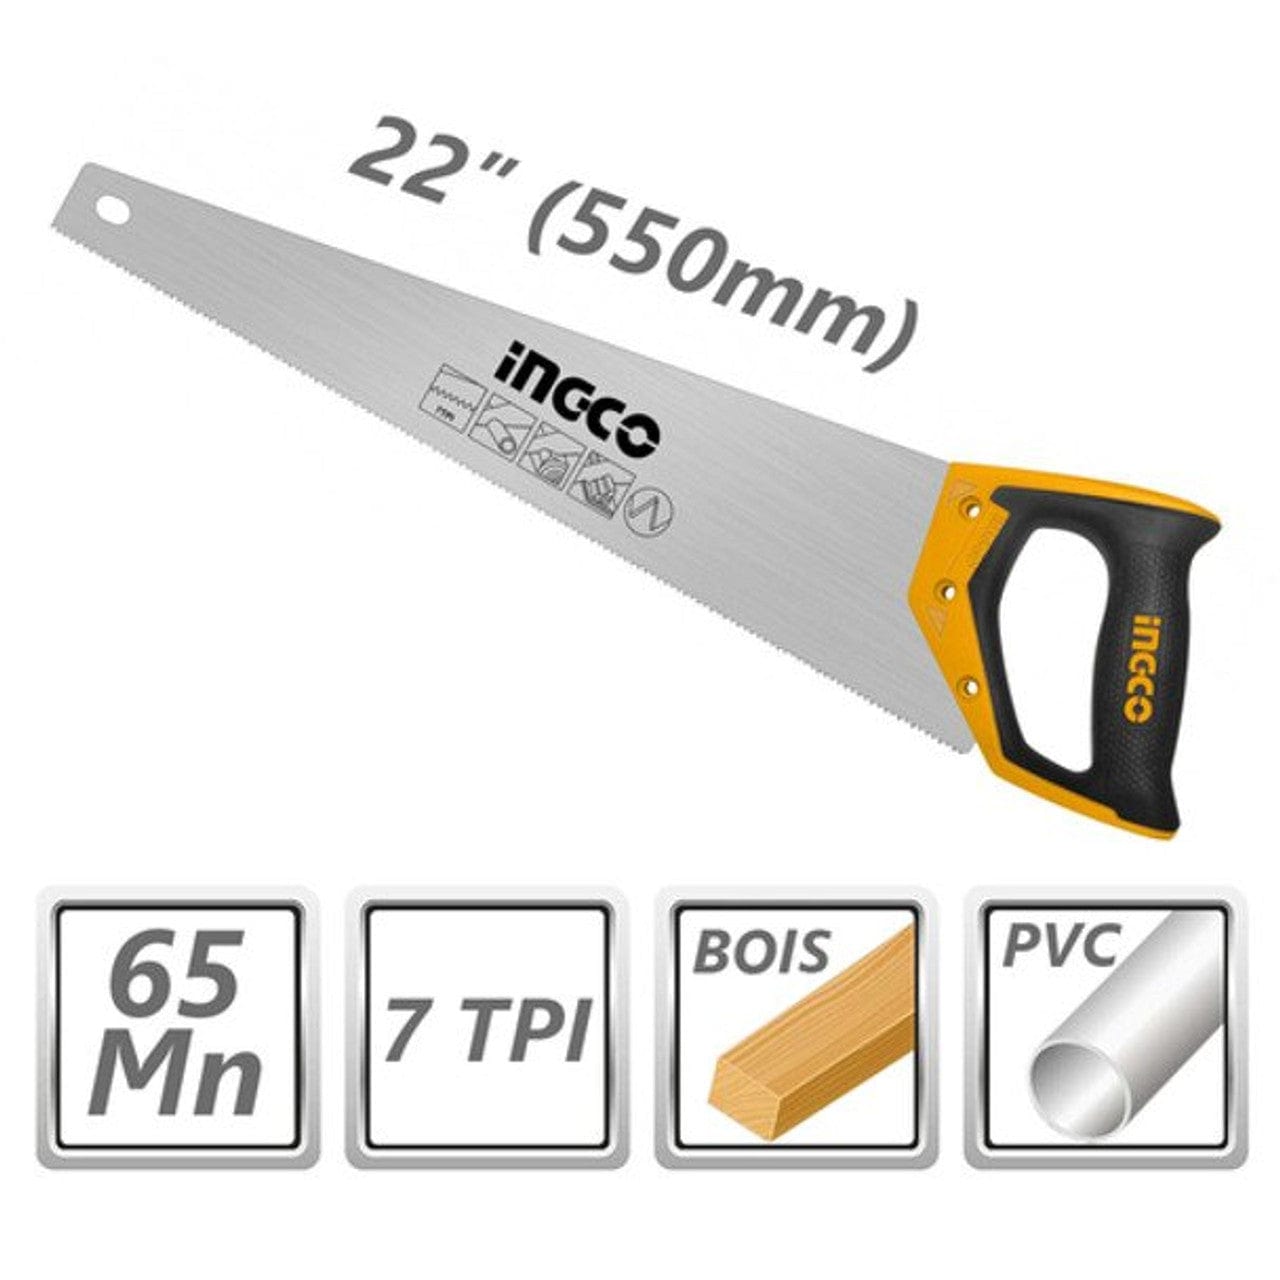 Ingco 22" (550mm) Hand Saw - HHAS08550 | Supply Master | Accra, Ghana Hand Saws & Cutting Tools Buy Tools hardware Building materials